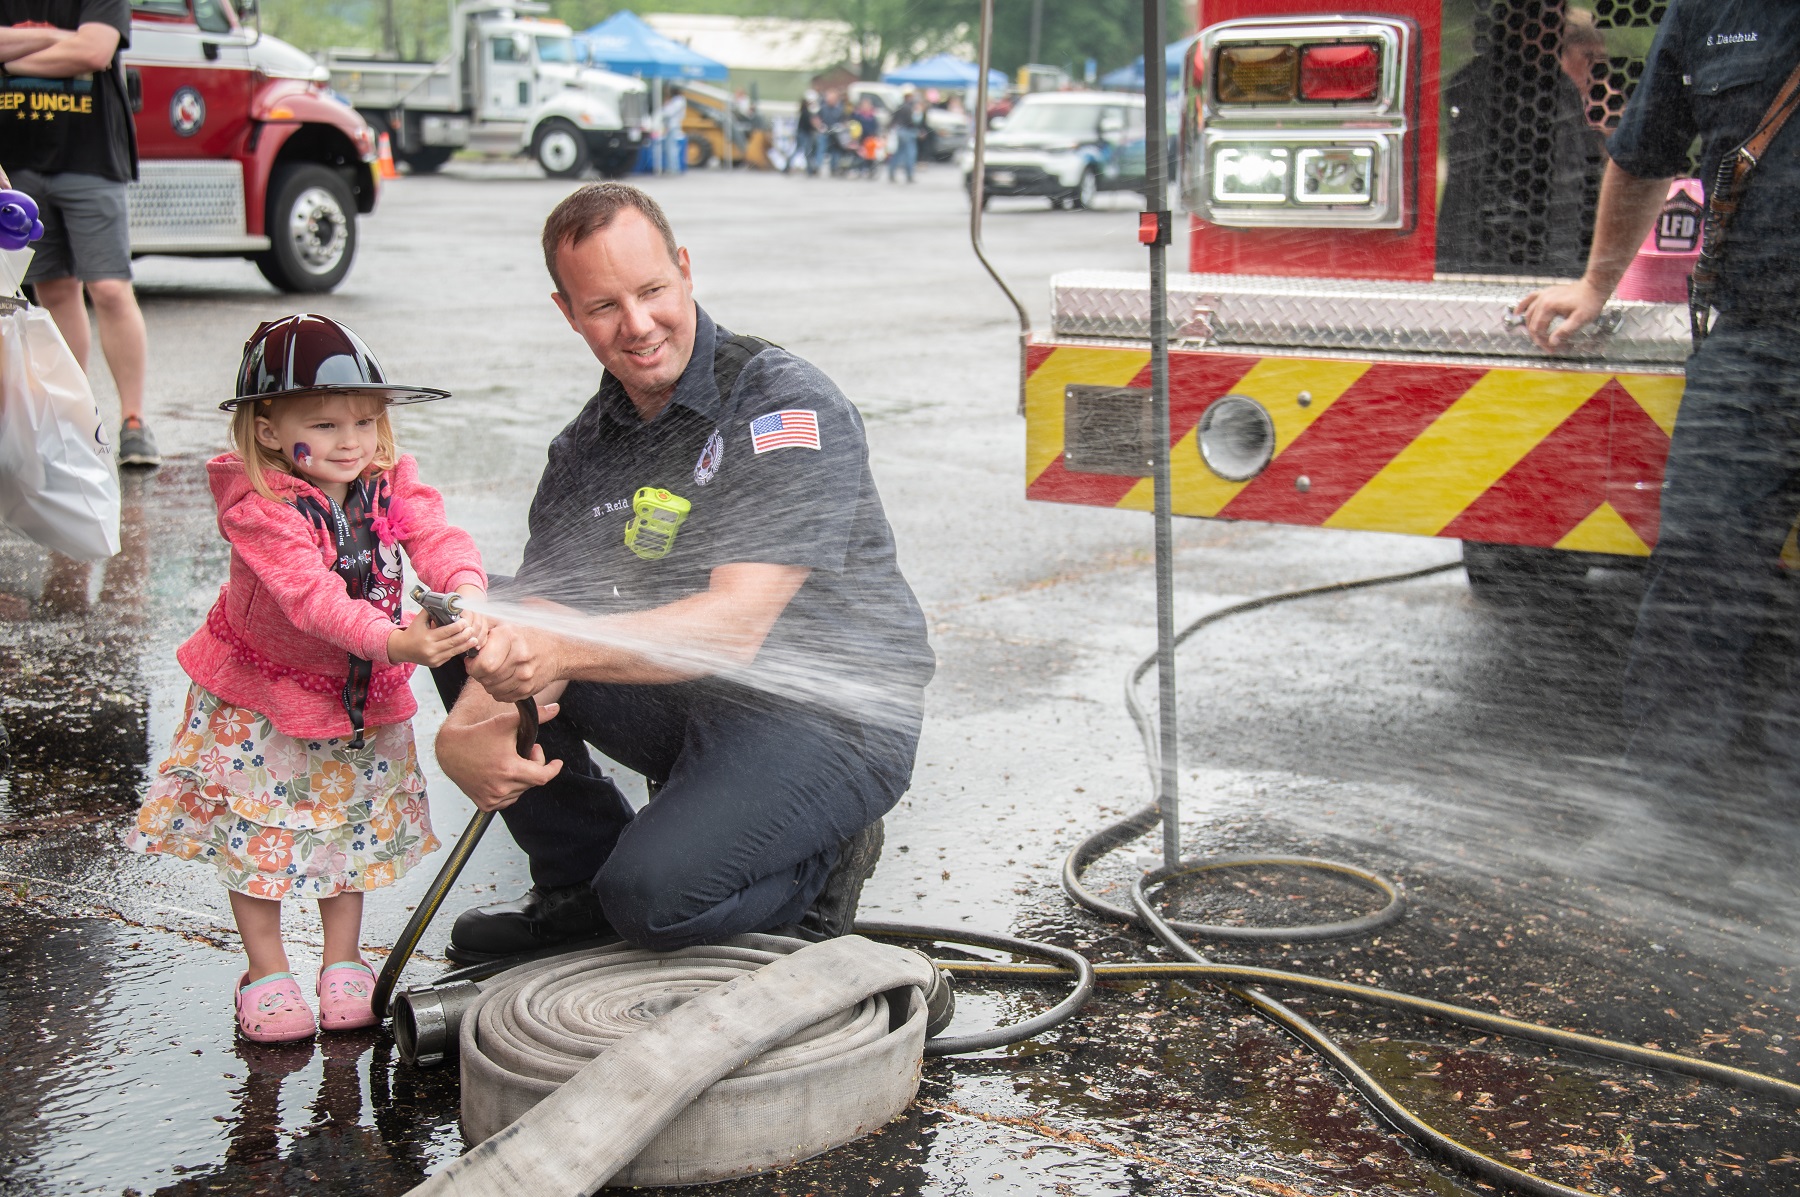 A child sprays water out of a hose while wearing a firefighters hat, and a firefighter is helping her